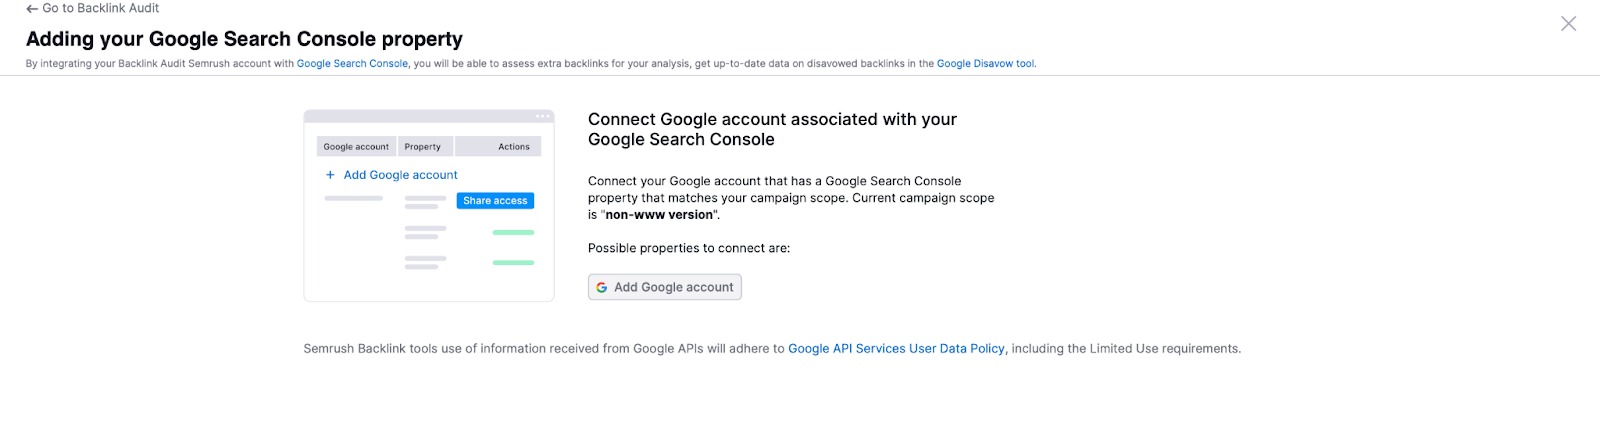 Connecting Backlink Audit to Google Accounts image 3